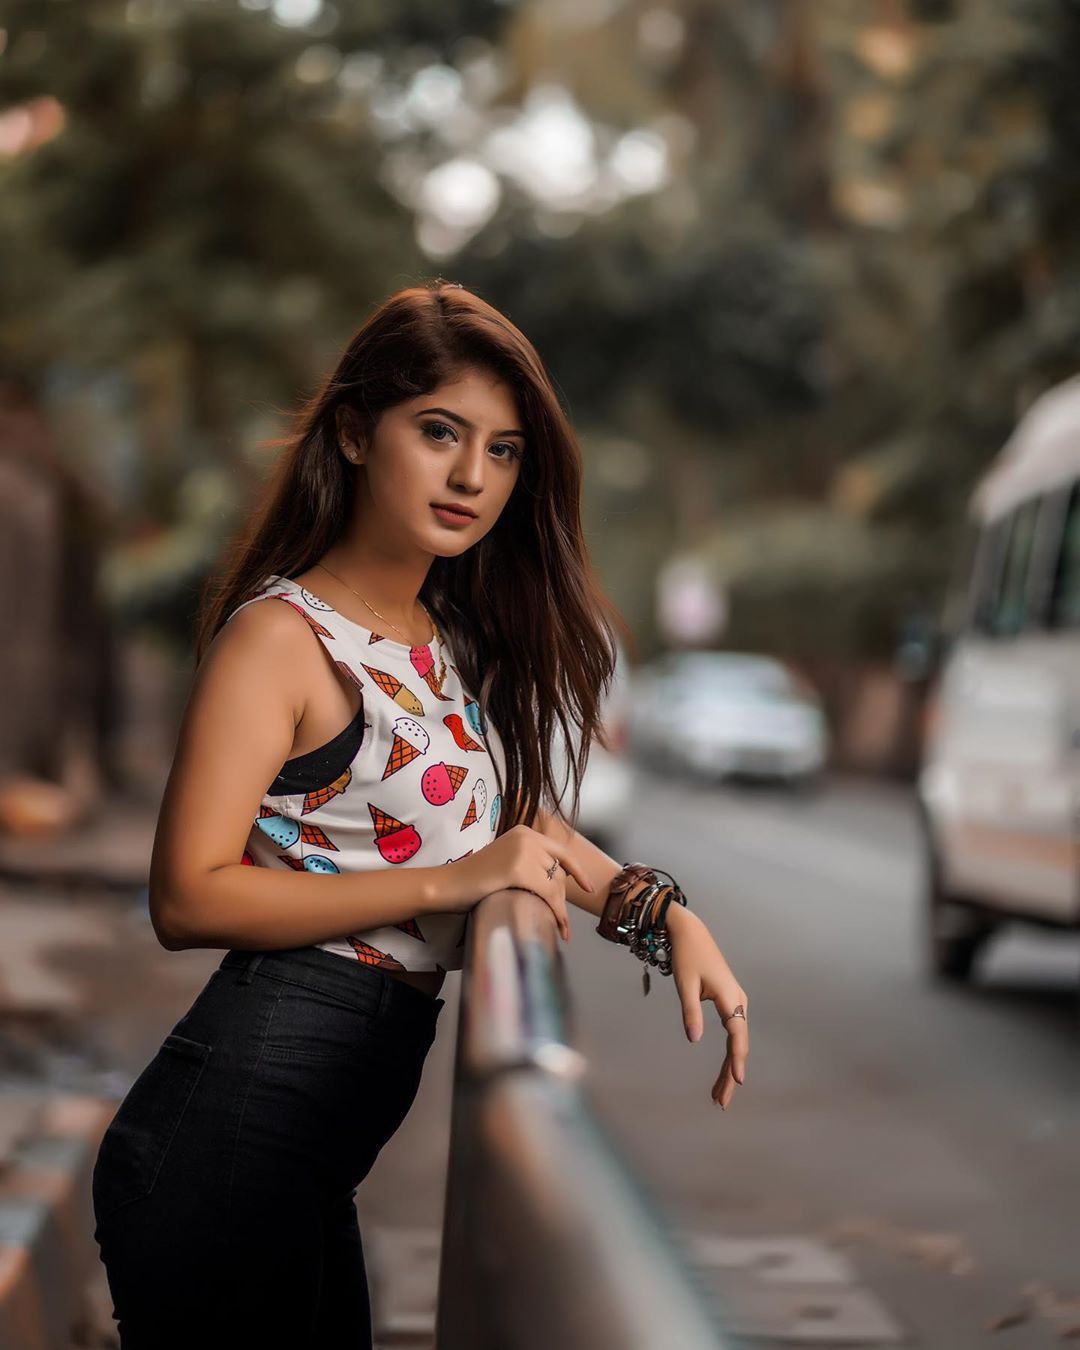 Latest Insta Images of Indian TikTok Star Arishfa Khan: TikTok Stars,  Girls On TikTok,  Hot TikTok Girls,  Viral TikTok Videos,  Indian TikTok Model,  TikTok Girls,  Hot TikTok Models,  Sexy Arishfa Khan,  Instagram Model Arishfa Khan,  Model Arishfa Khan,  Arishfa Khan Sexy Pictures  